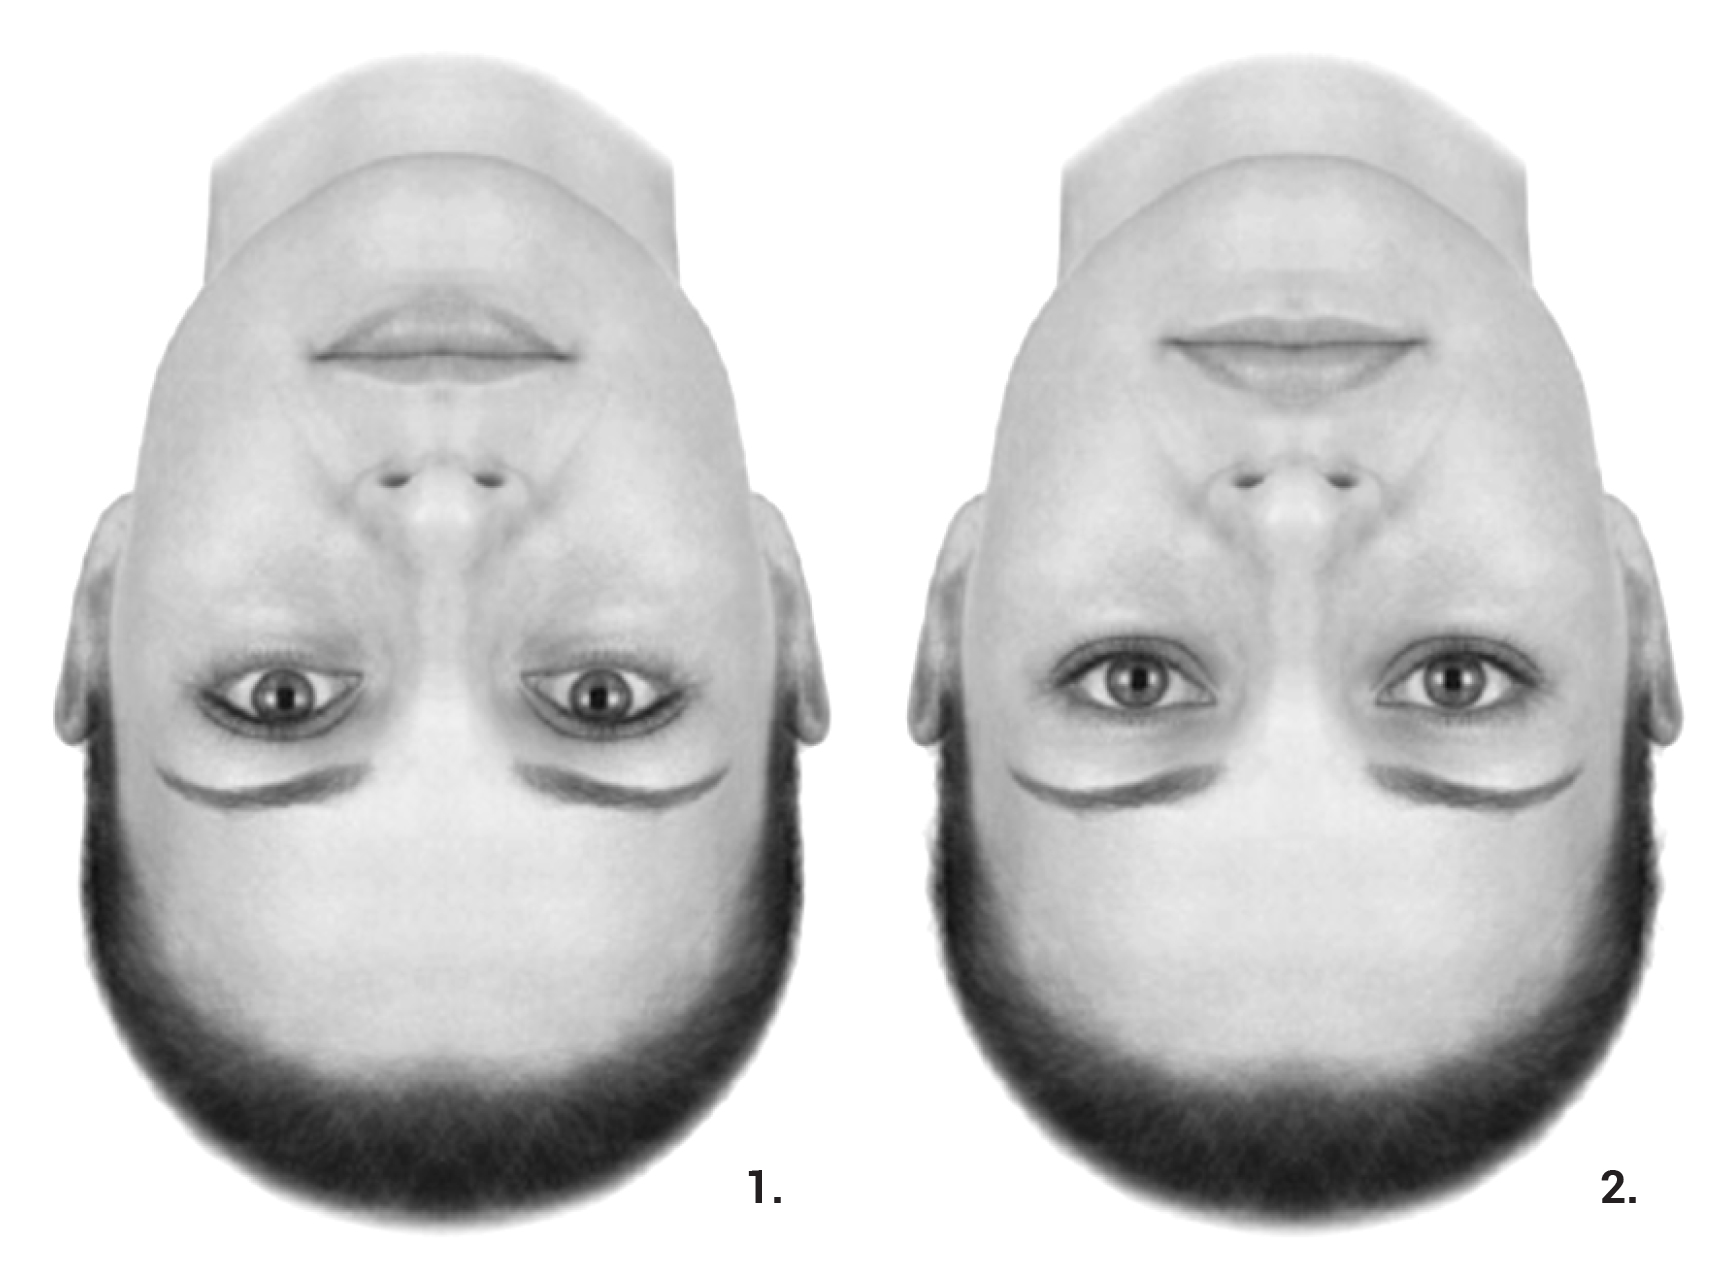   Example of the “Thatcher Effect”, from Little et al, “The many faces of research on face perception”, Philosophical Transactions of the Royal Society, 2011.  